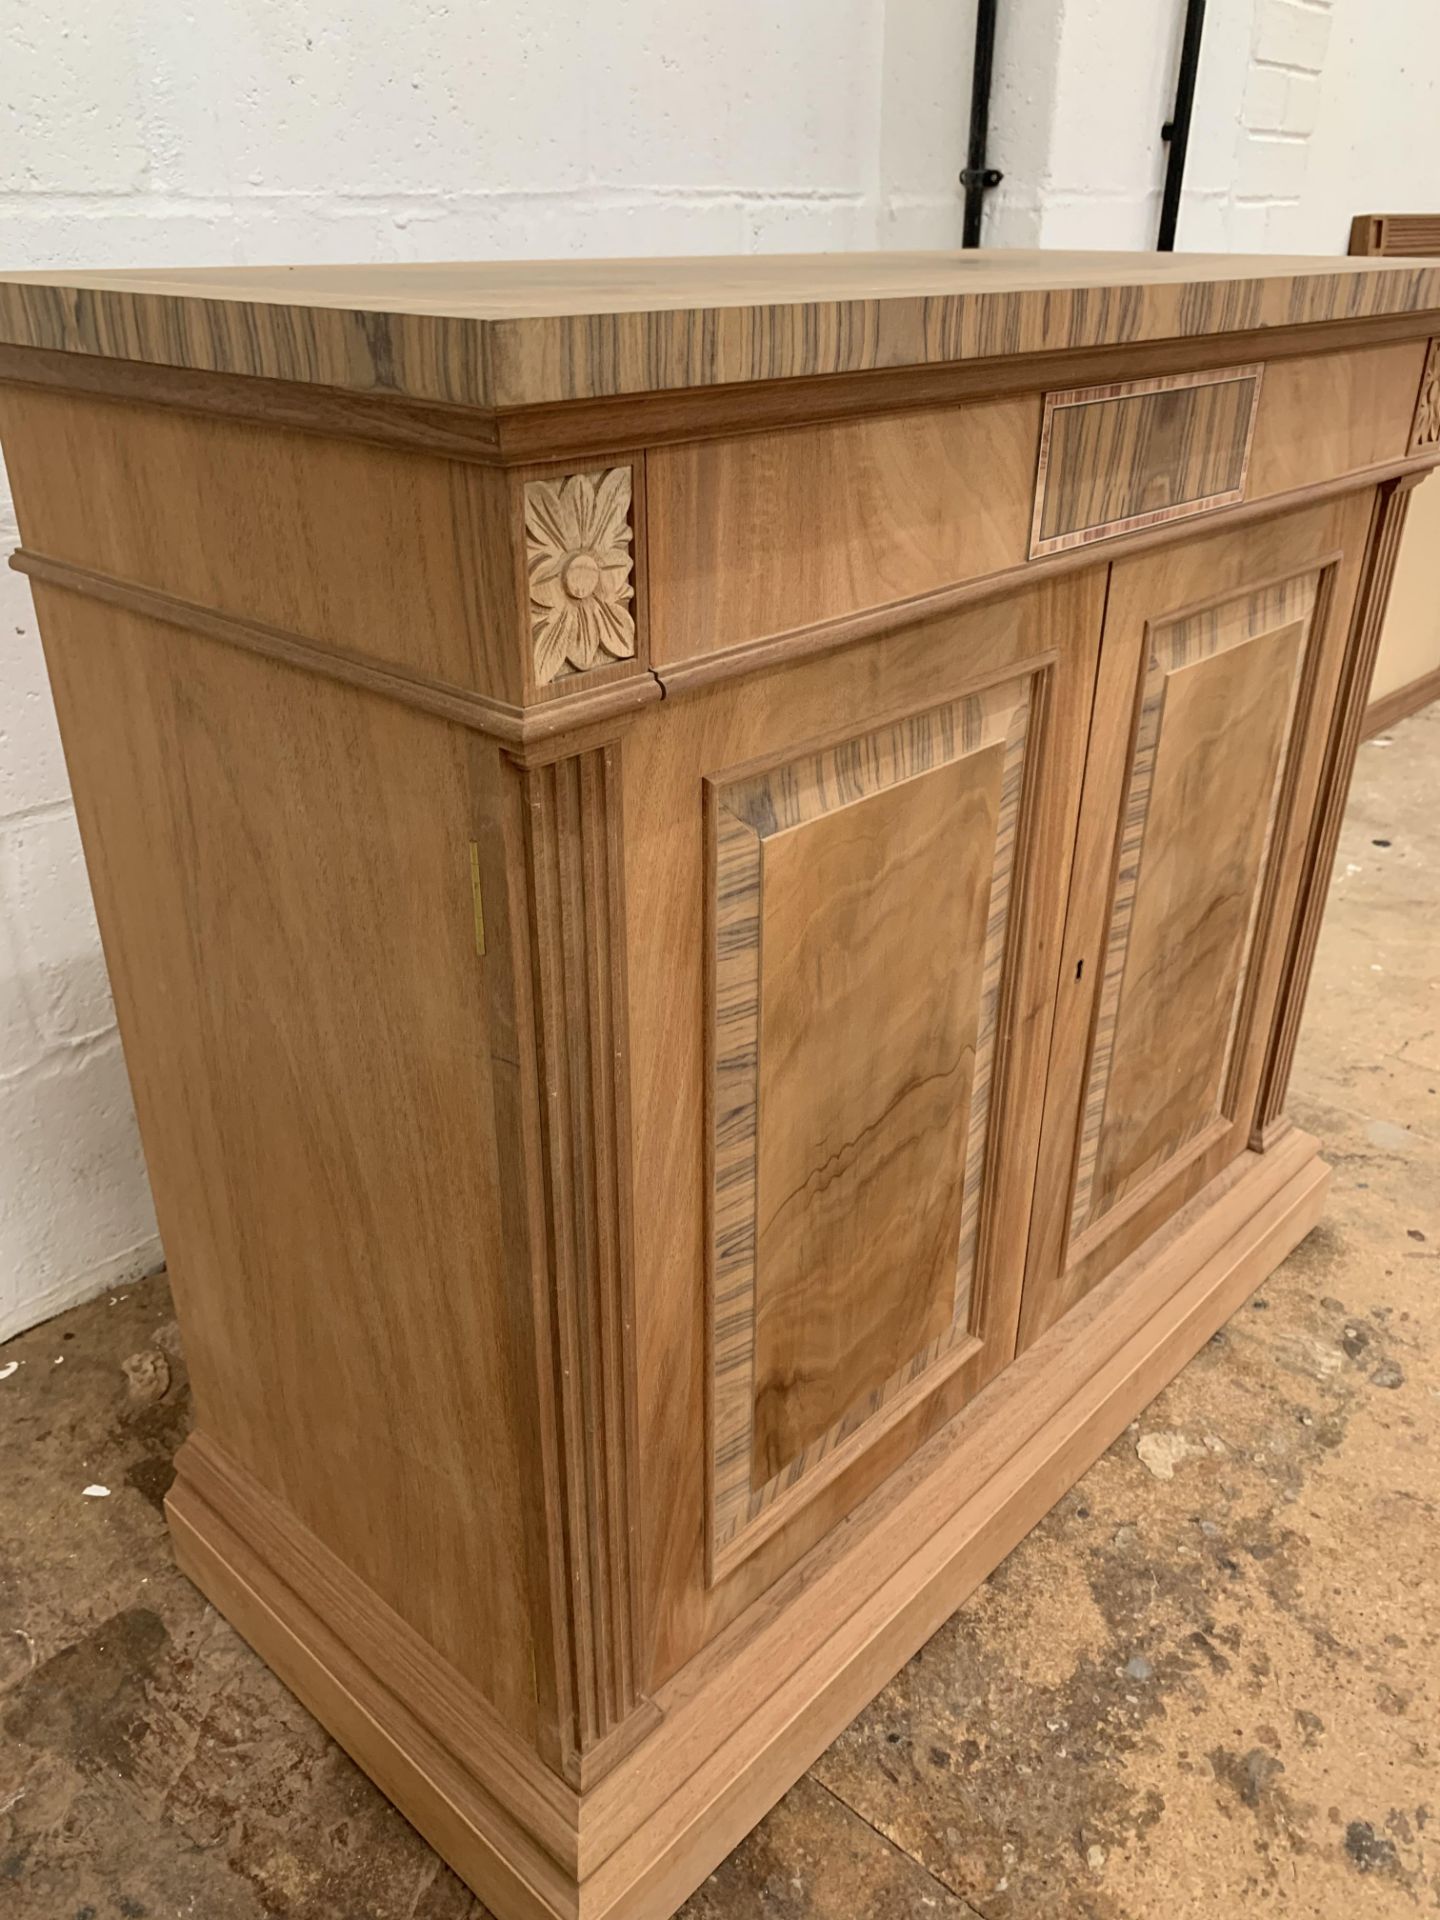 Small two-door Sideboard, in Mahogany finish, from the Corinthian range, requires finishing/ - Image 3 of 5